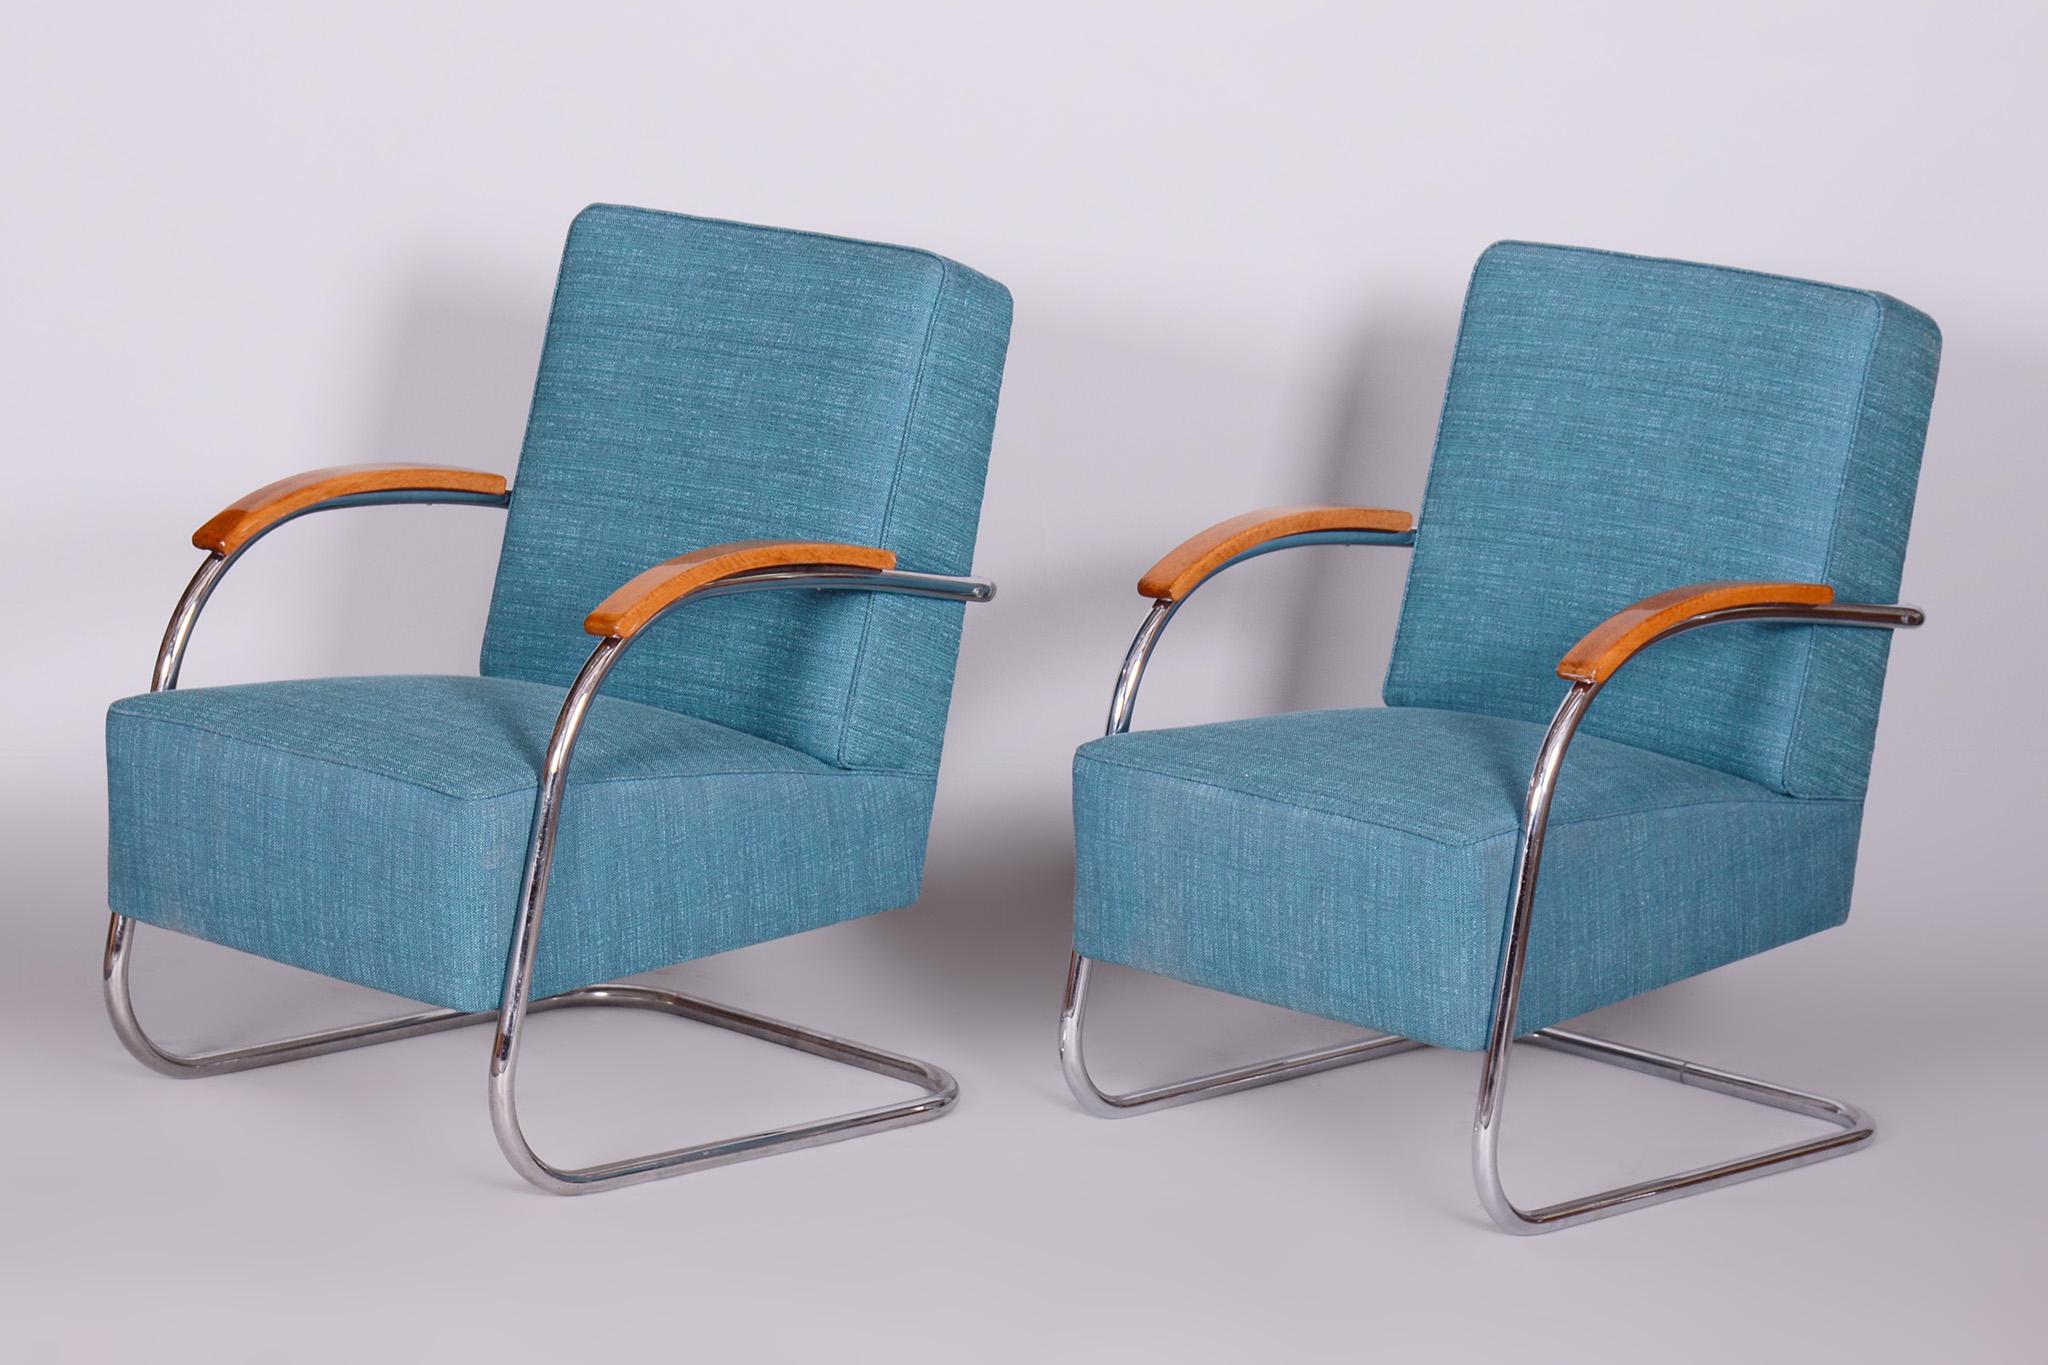 Set of Two Restored Blue Armchairs by Mucke-Melder, Czechia, 1930s For Sale 1